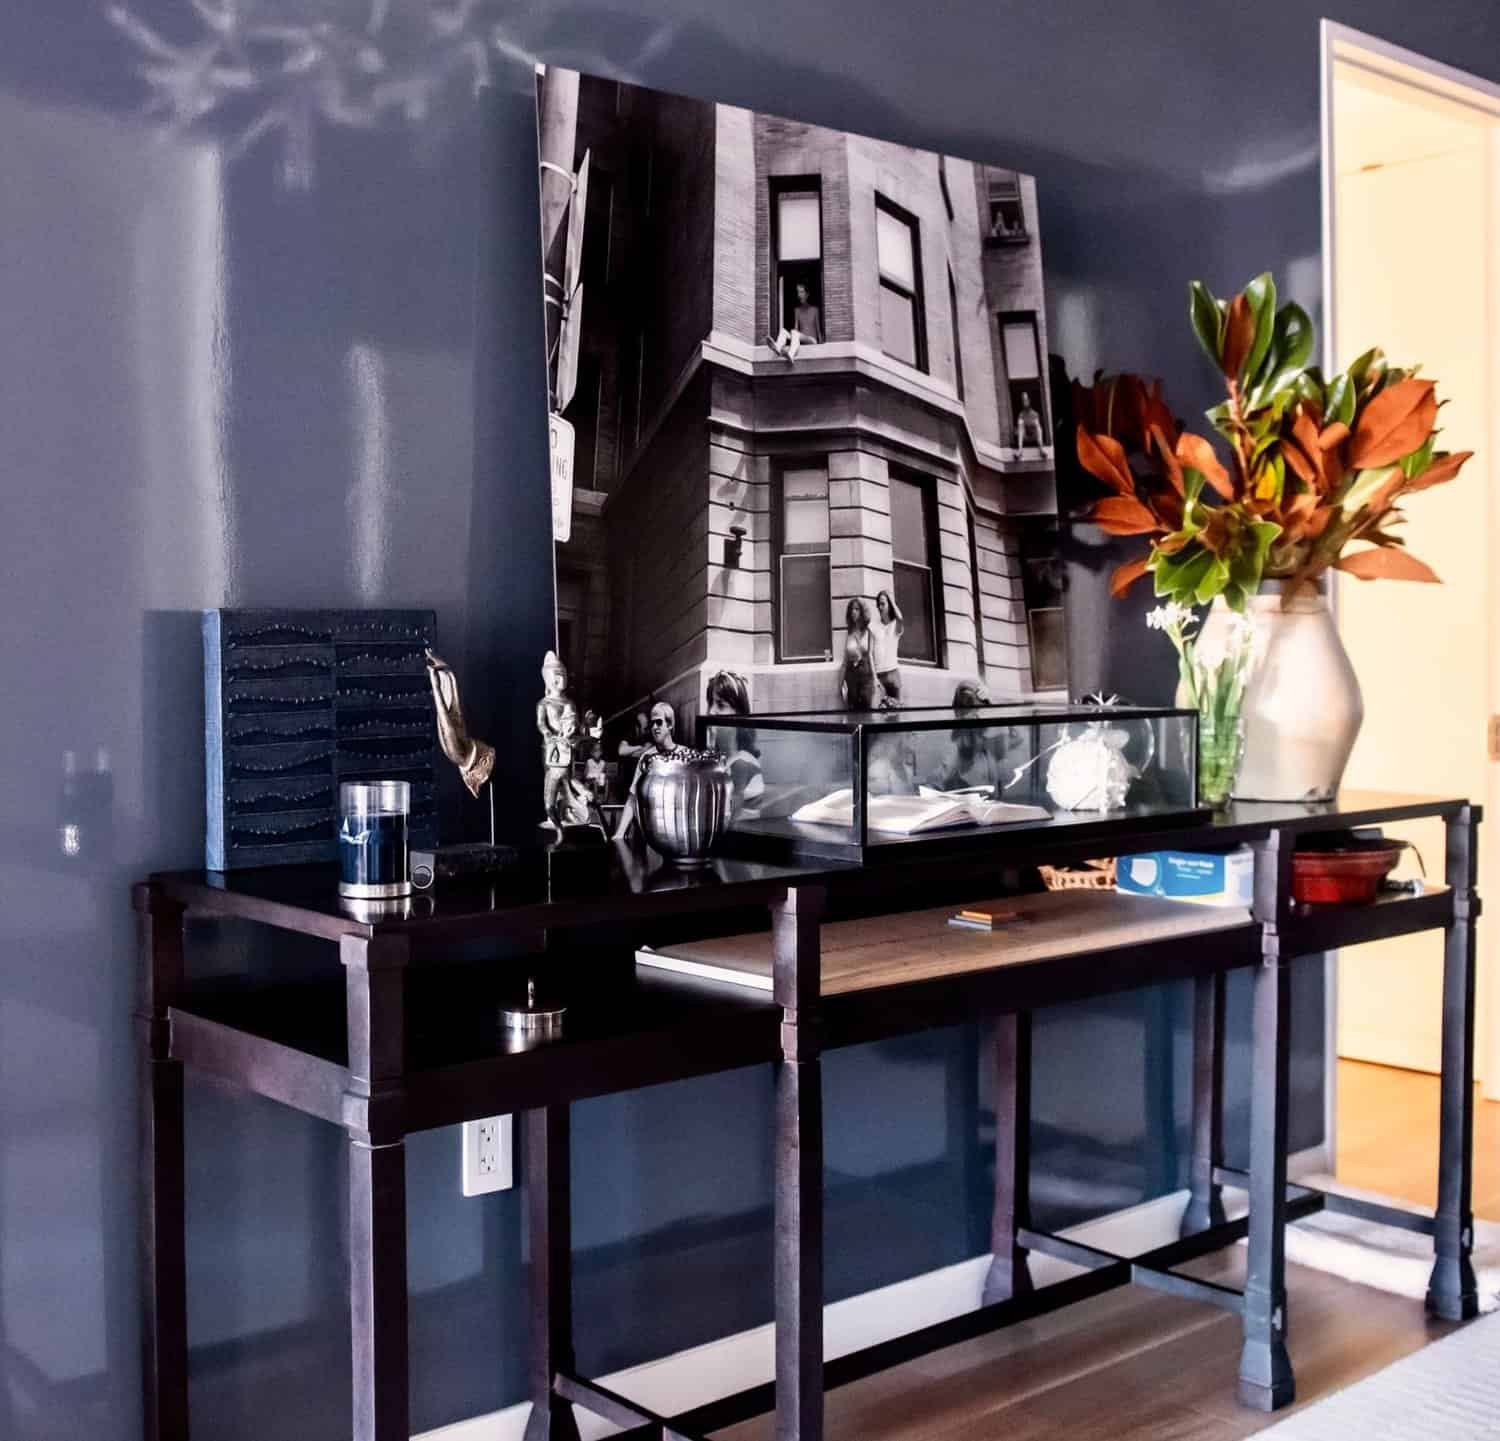 Console table against a dark glossy blue wall, decorated with a large black-and-white photo and various ornaments, showcasing a stylish, contemporary interior.